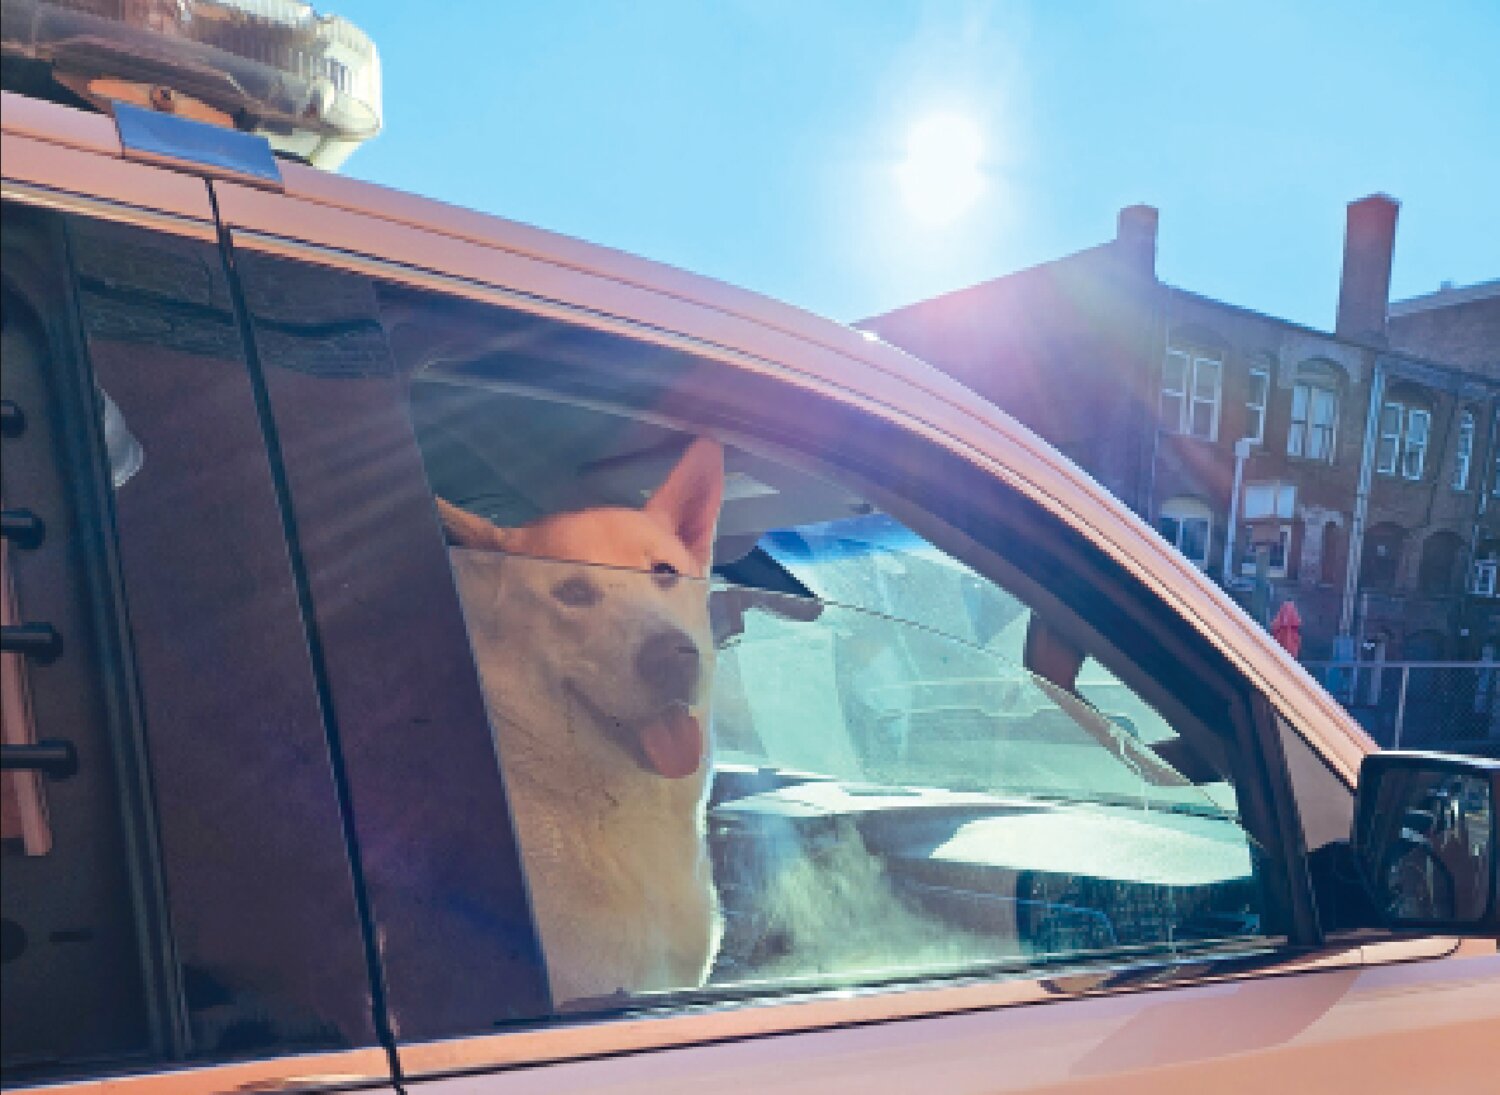 A dog looks out the window of a Centralia Police Department community service officer’s vehicle in this photo published on Facebook by the department.